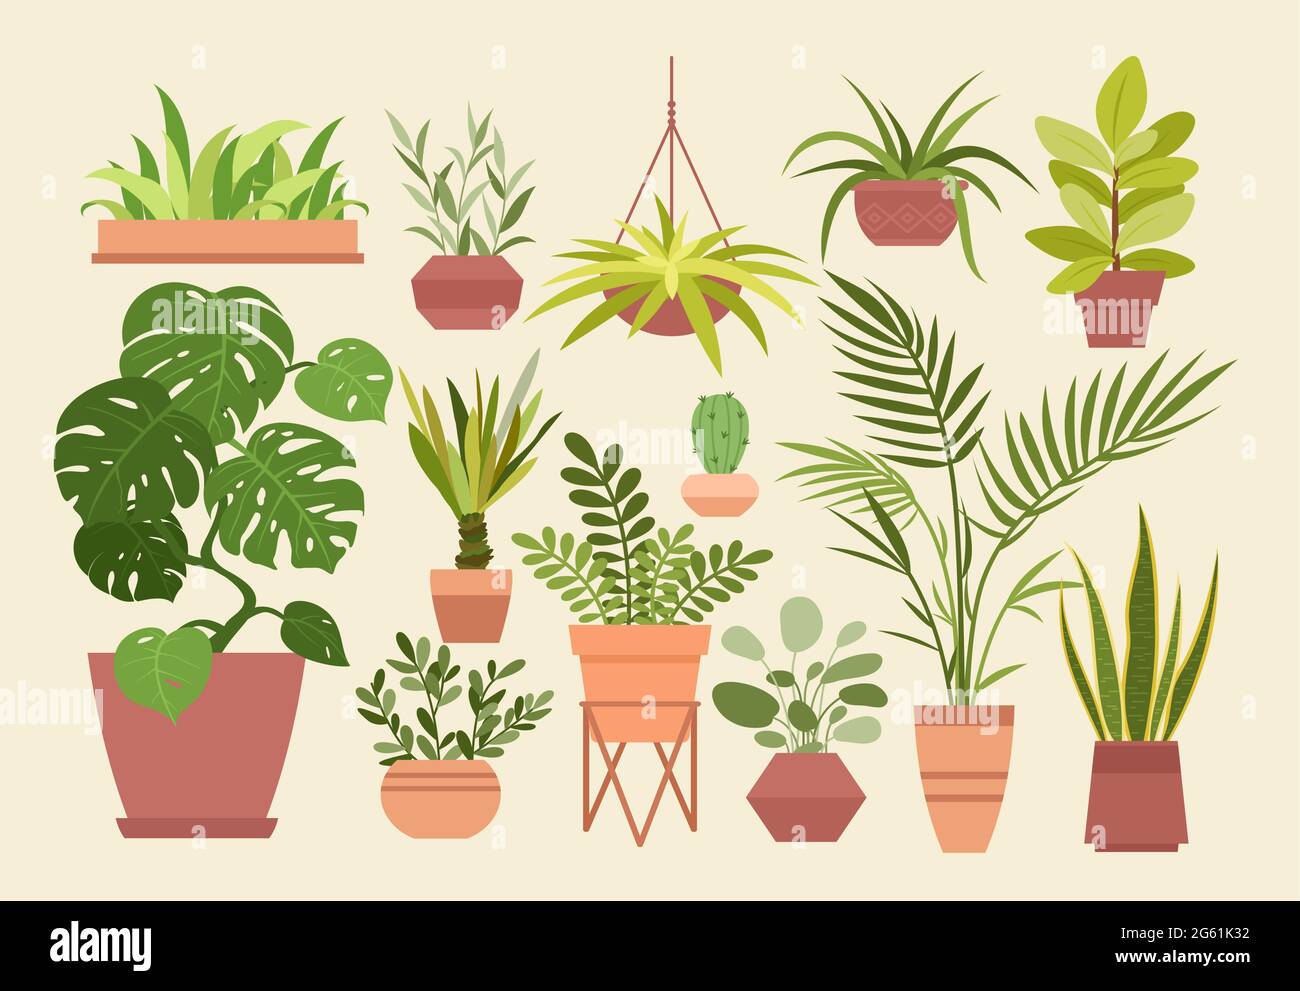 Plant in pot vector illustration set, cartoon flat different indoor potted decorative house plants for interior home or office decoration isolated Stock Vector